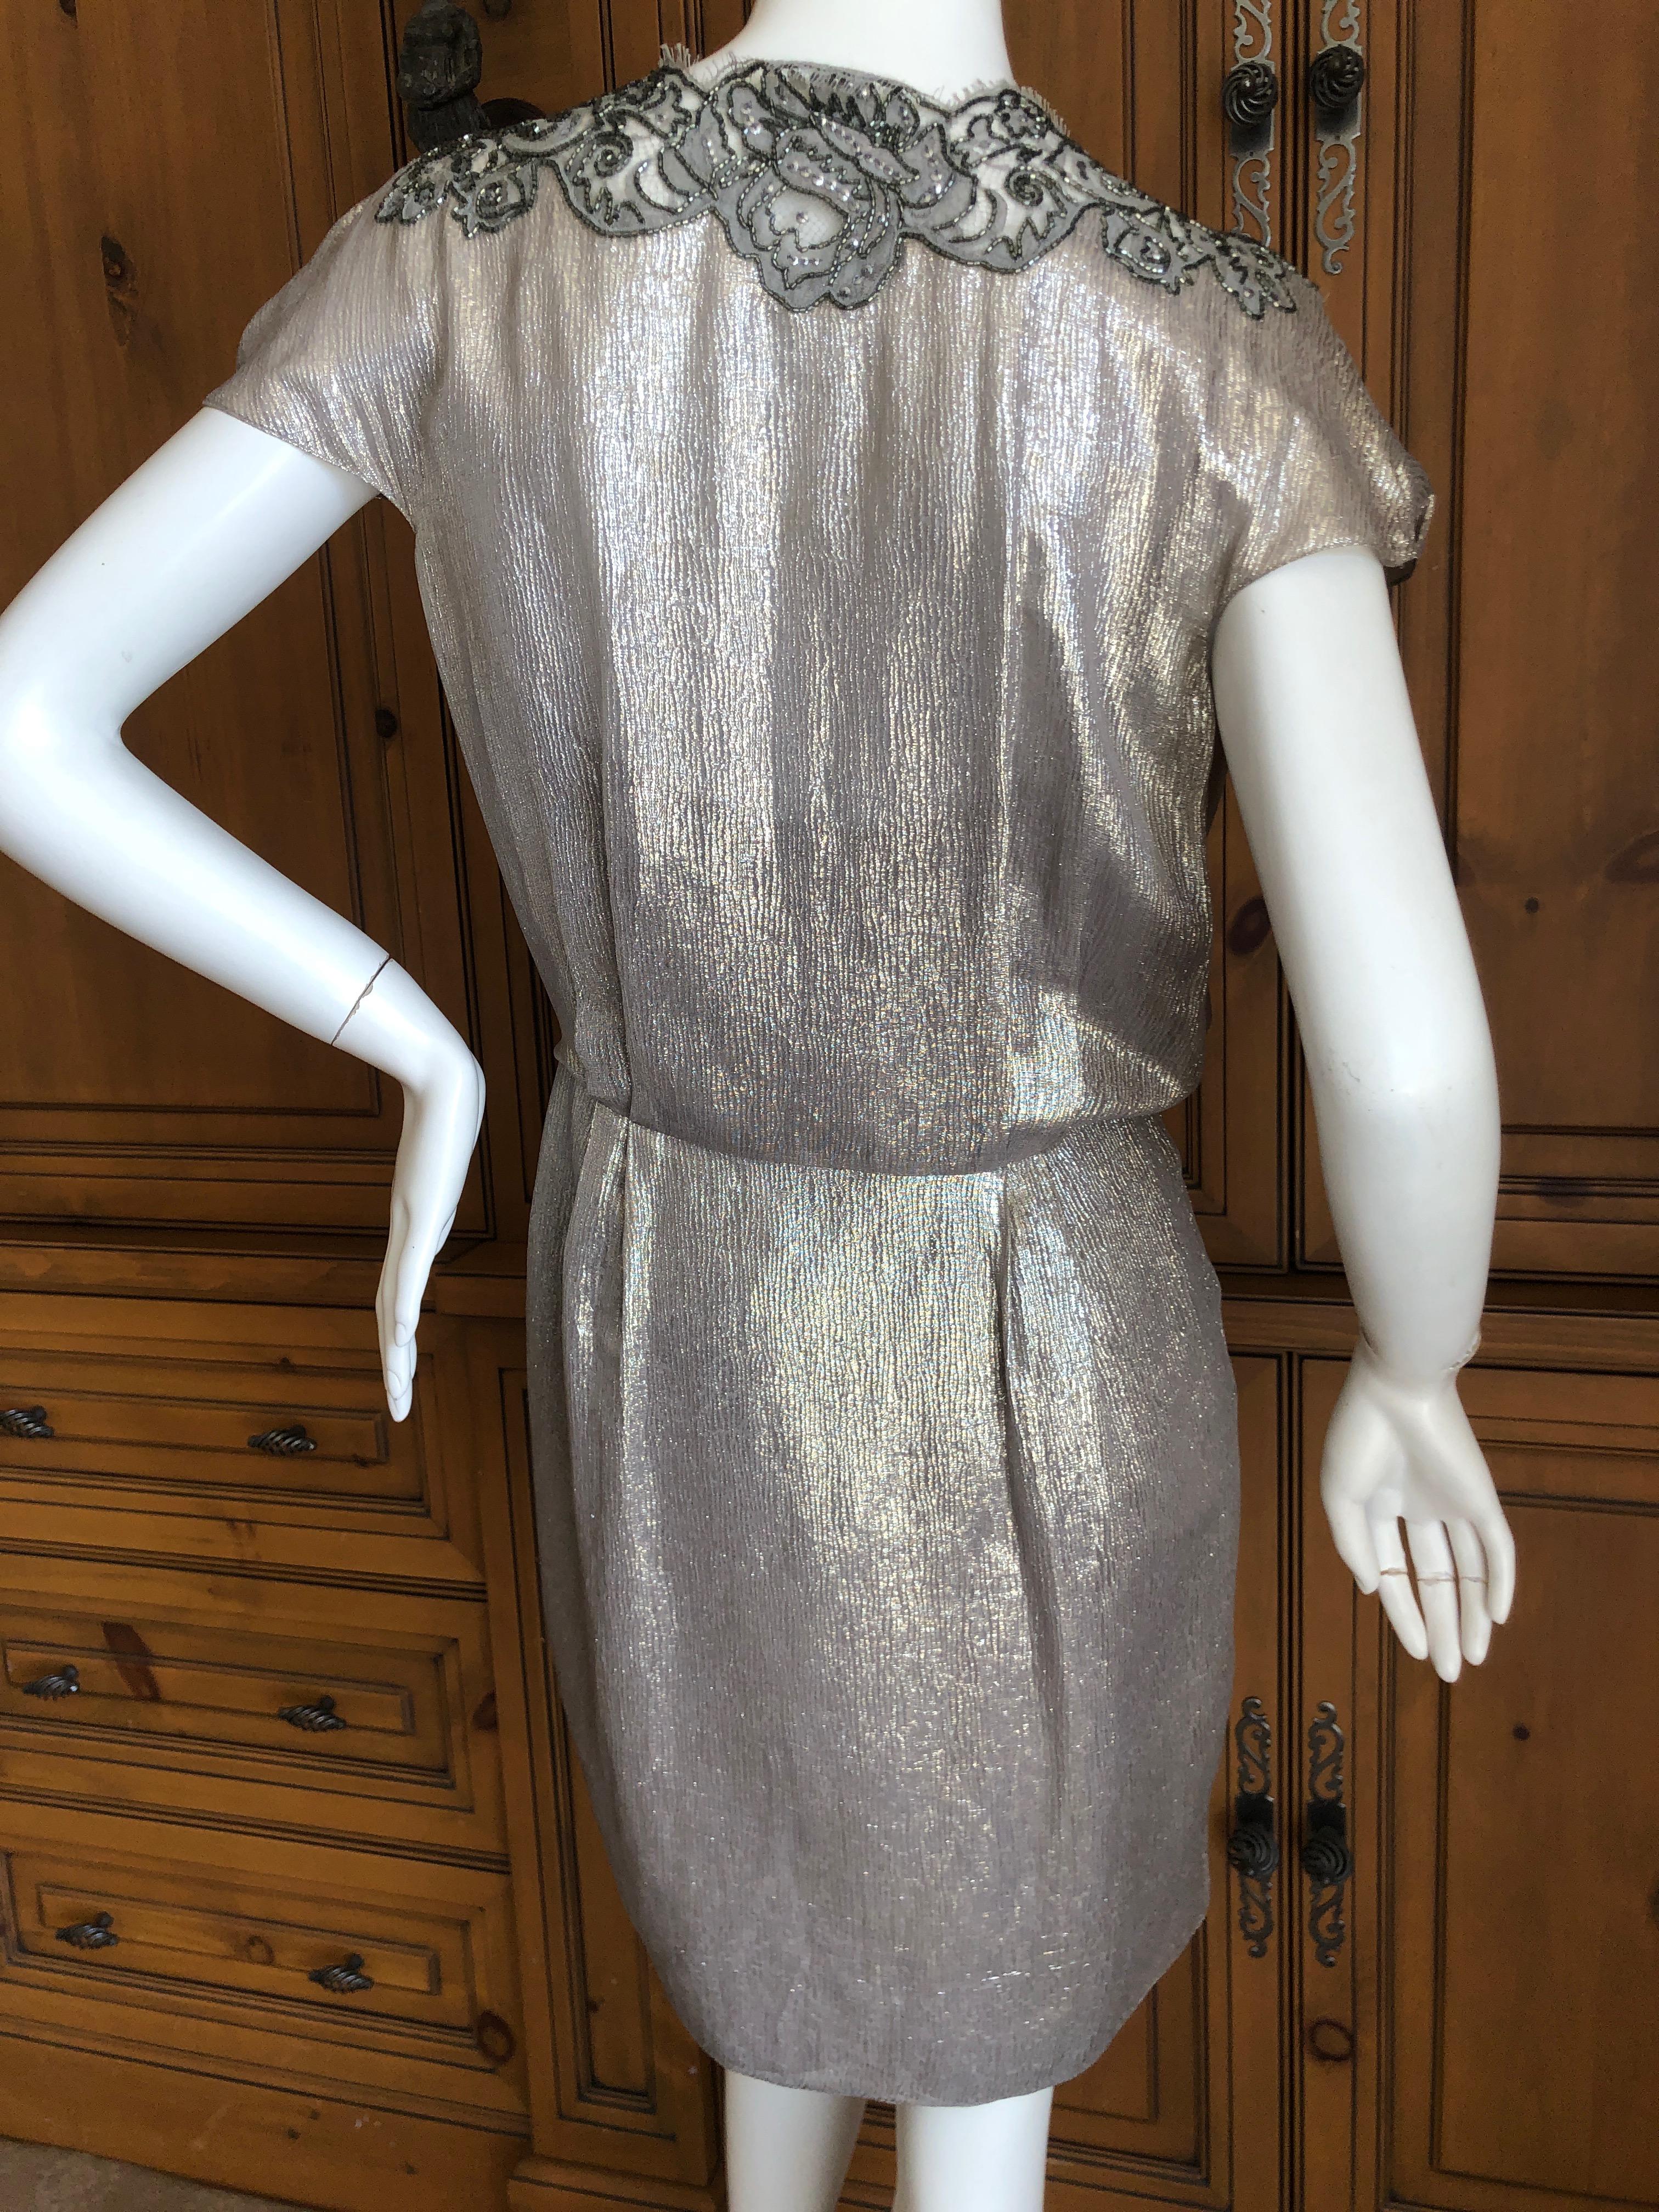  Christian Dior by Gianfranco Ferre Bead Embellished Metallic Wrap Dress  For Sale 6